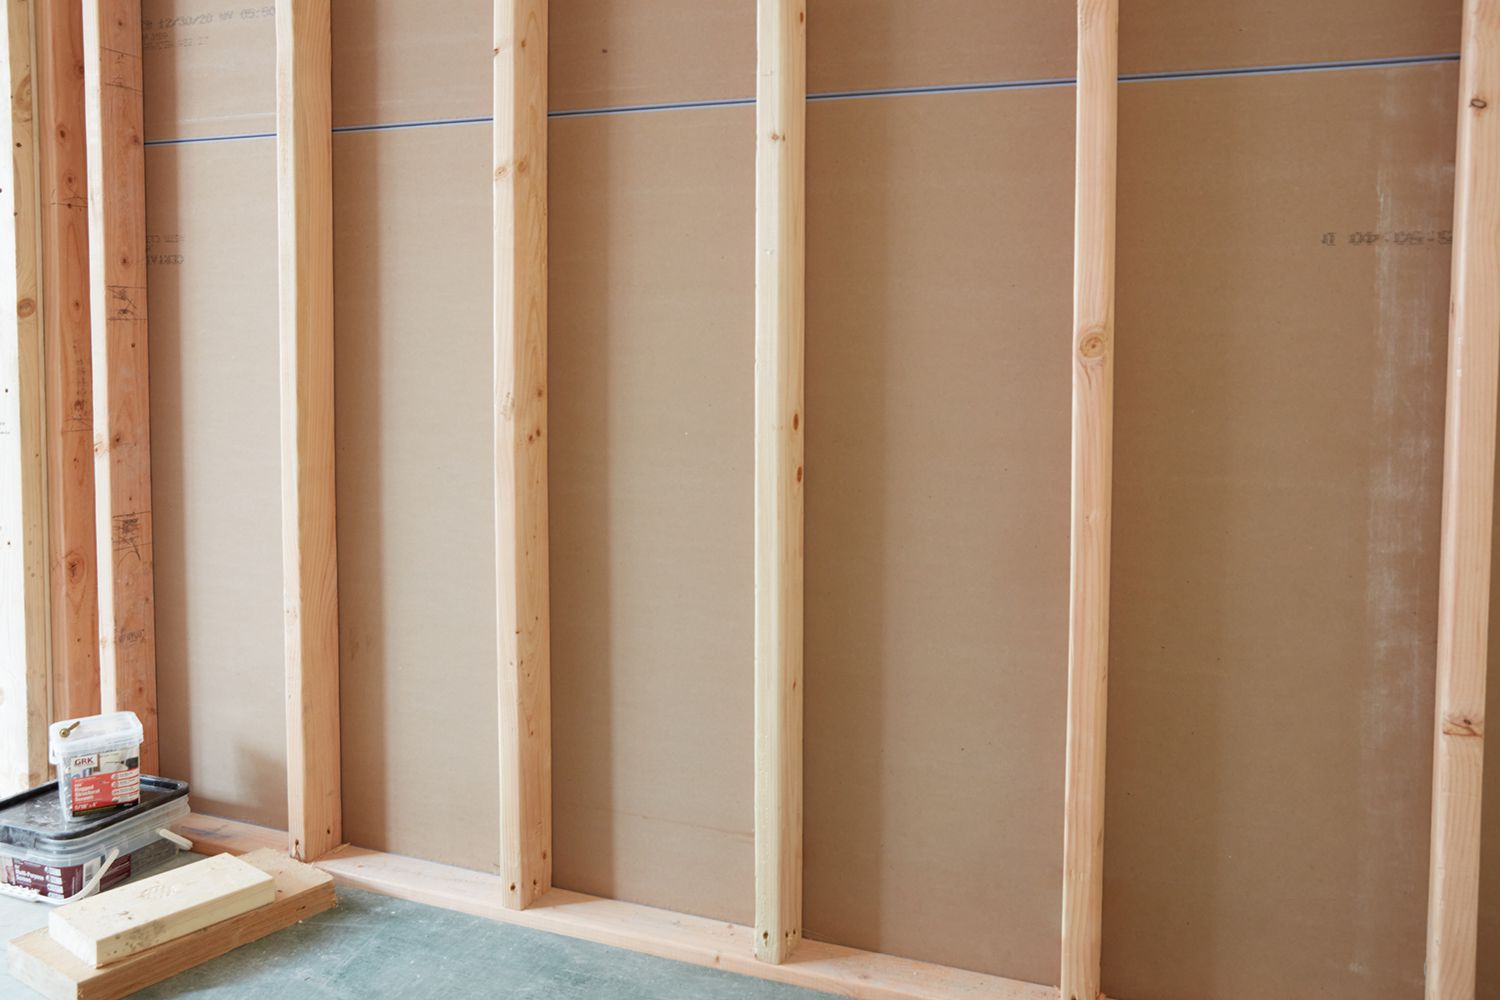 What Size Studs For Interior Walls